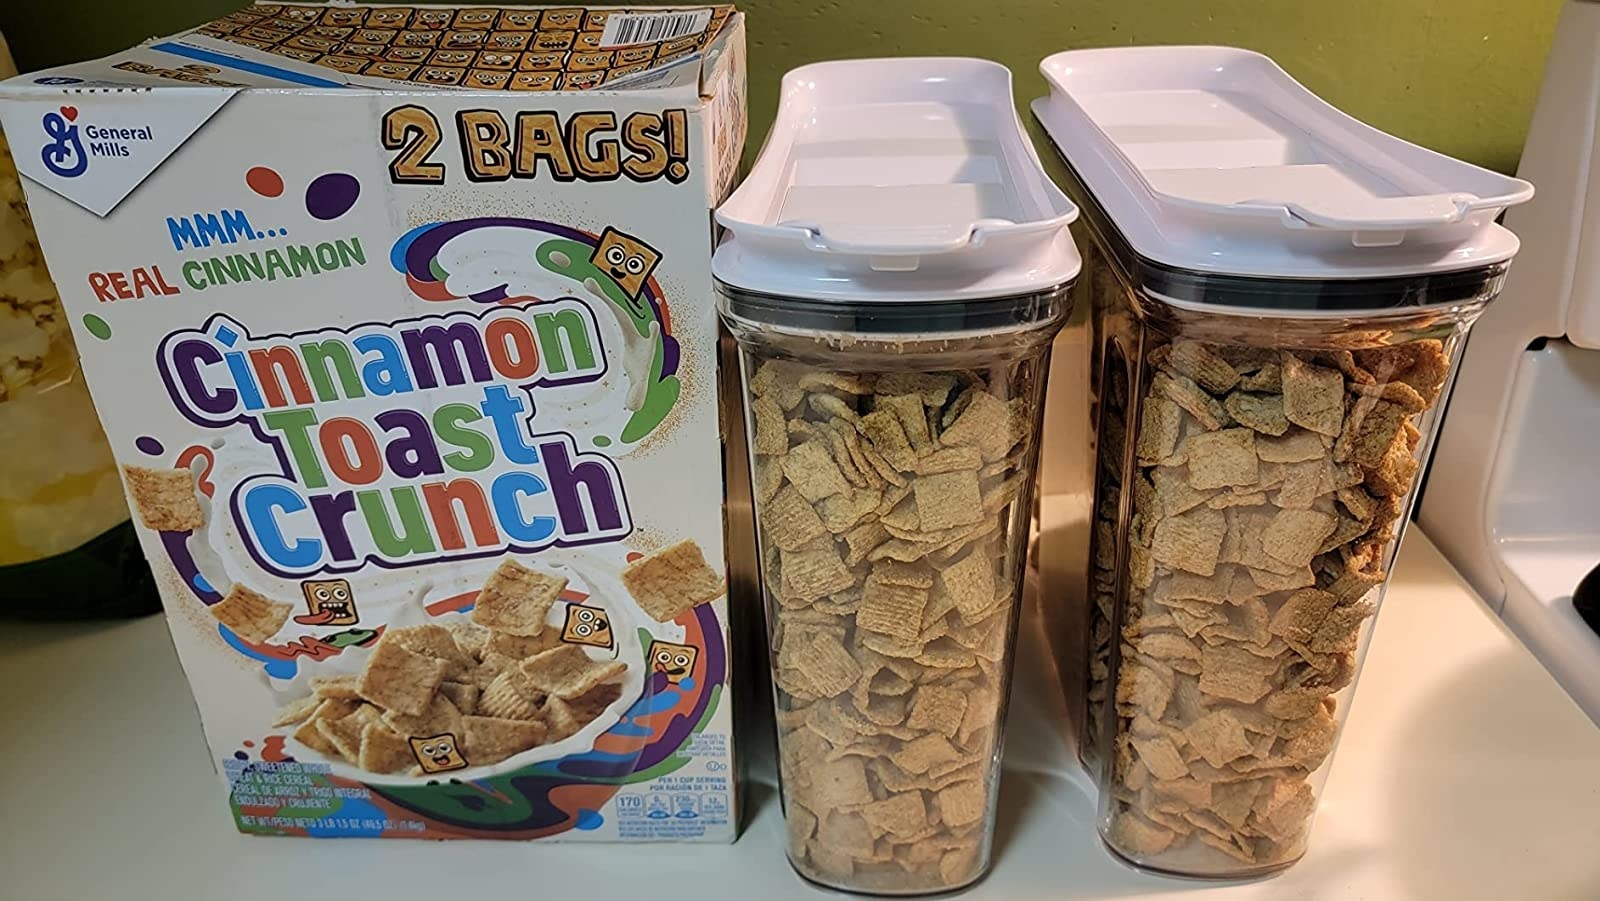 Reviewer image of two storage containers filled with cereal next to a box of cereal